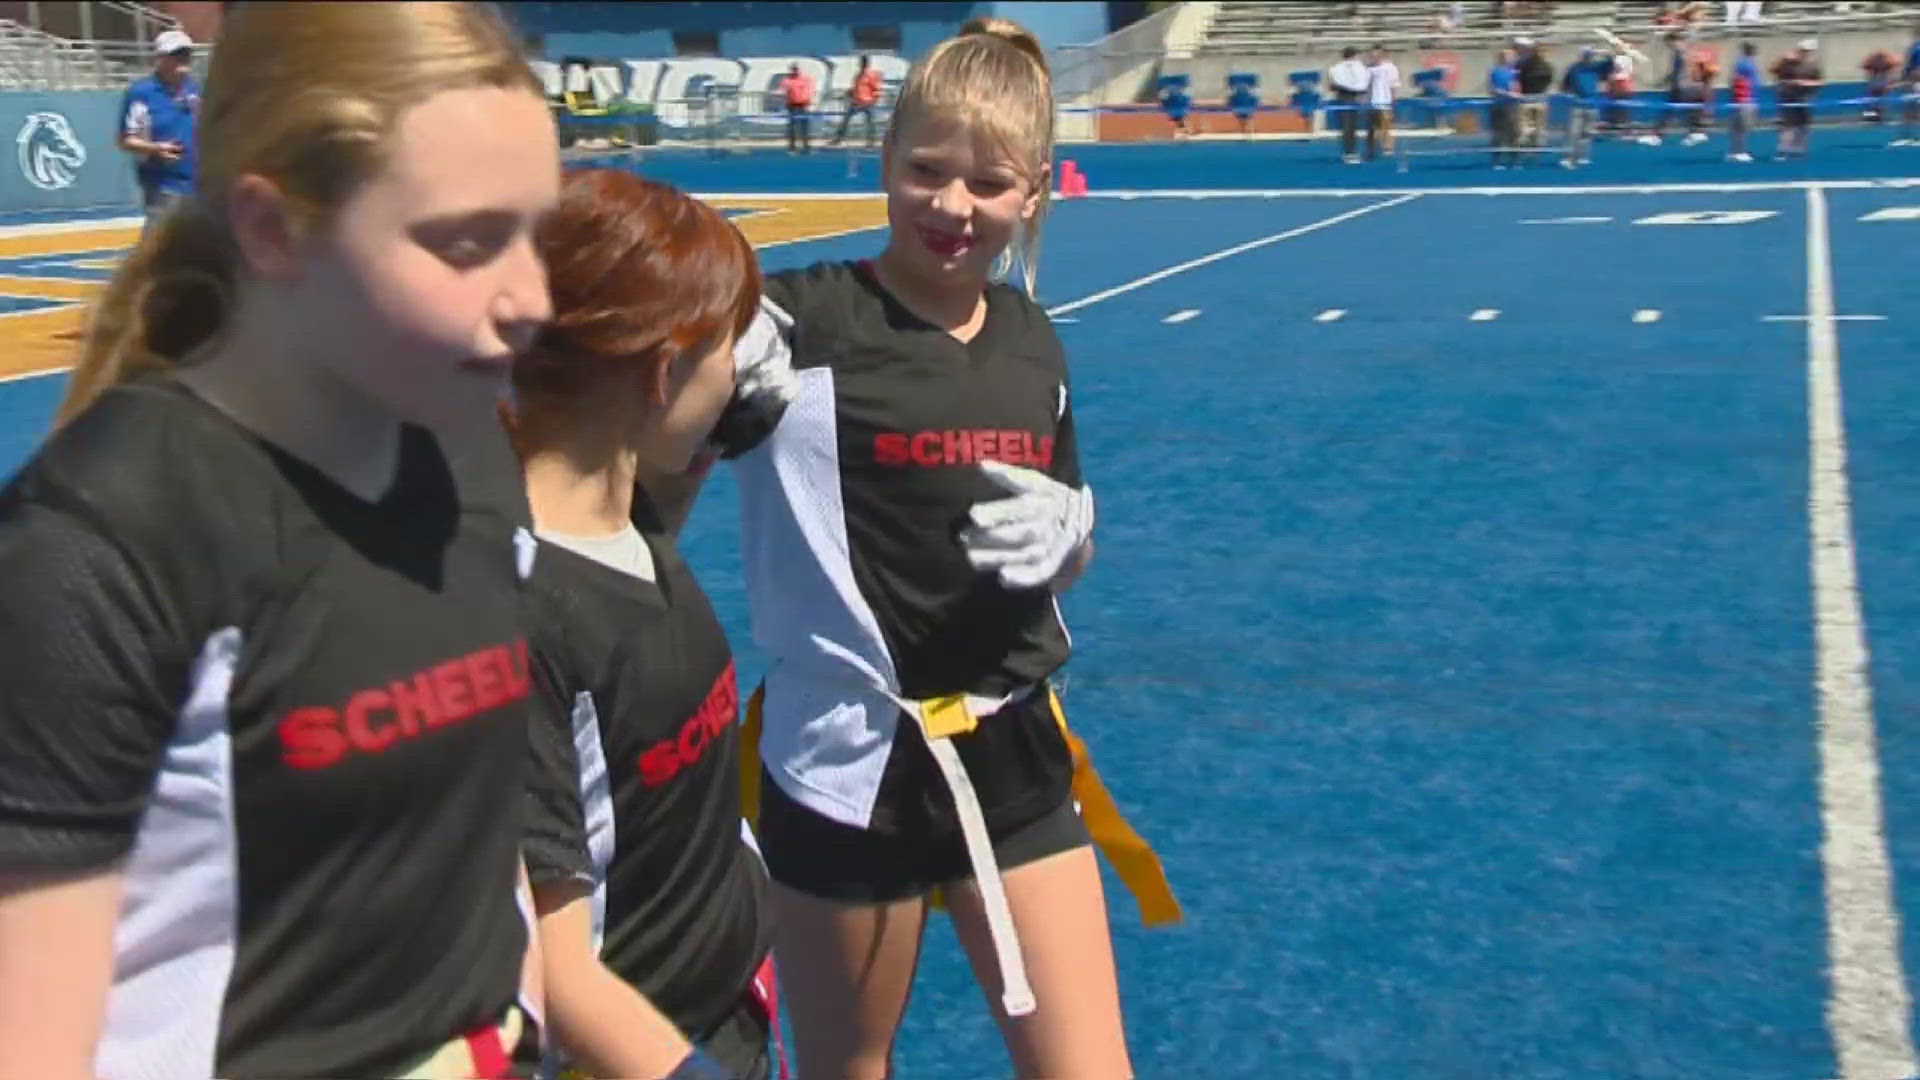 The Treasure Valley's first girls flag football program is the same 5-on-5 sport to be introduced at the 2028 Summer Olympics in Los Angeles.